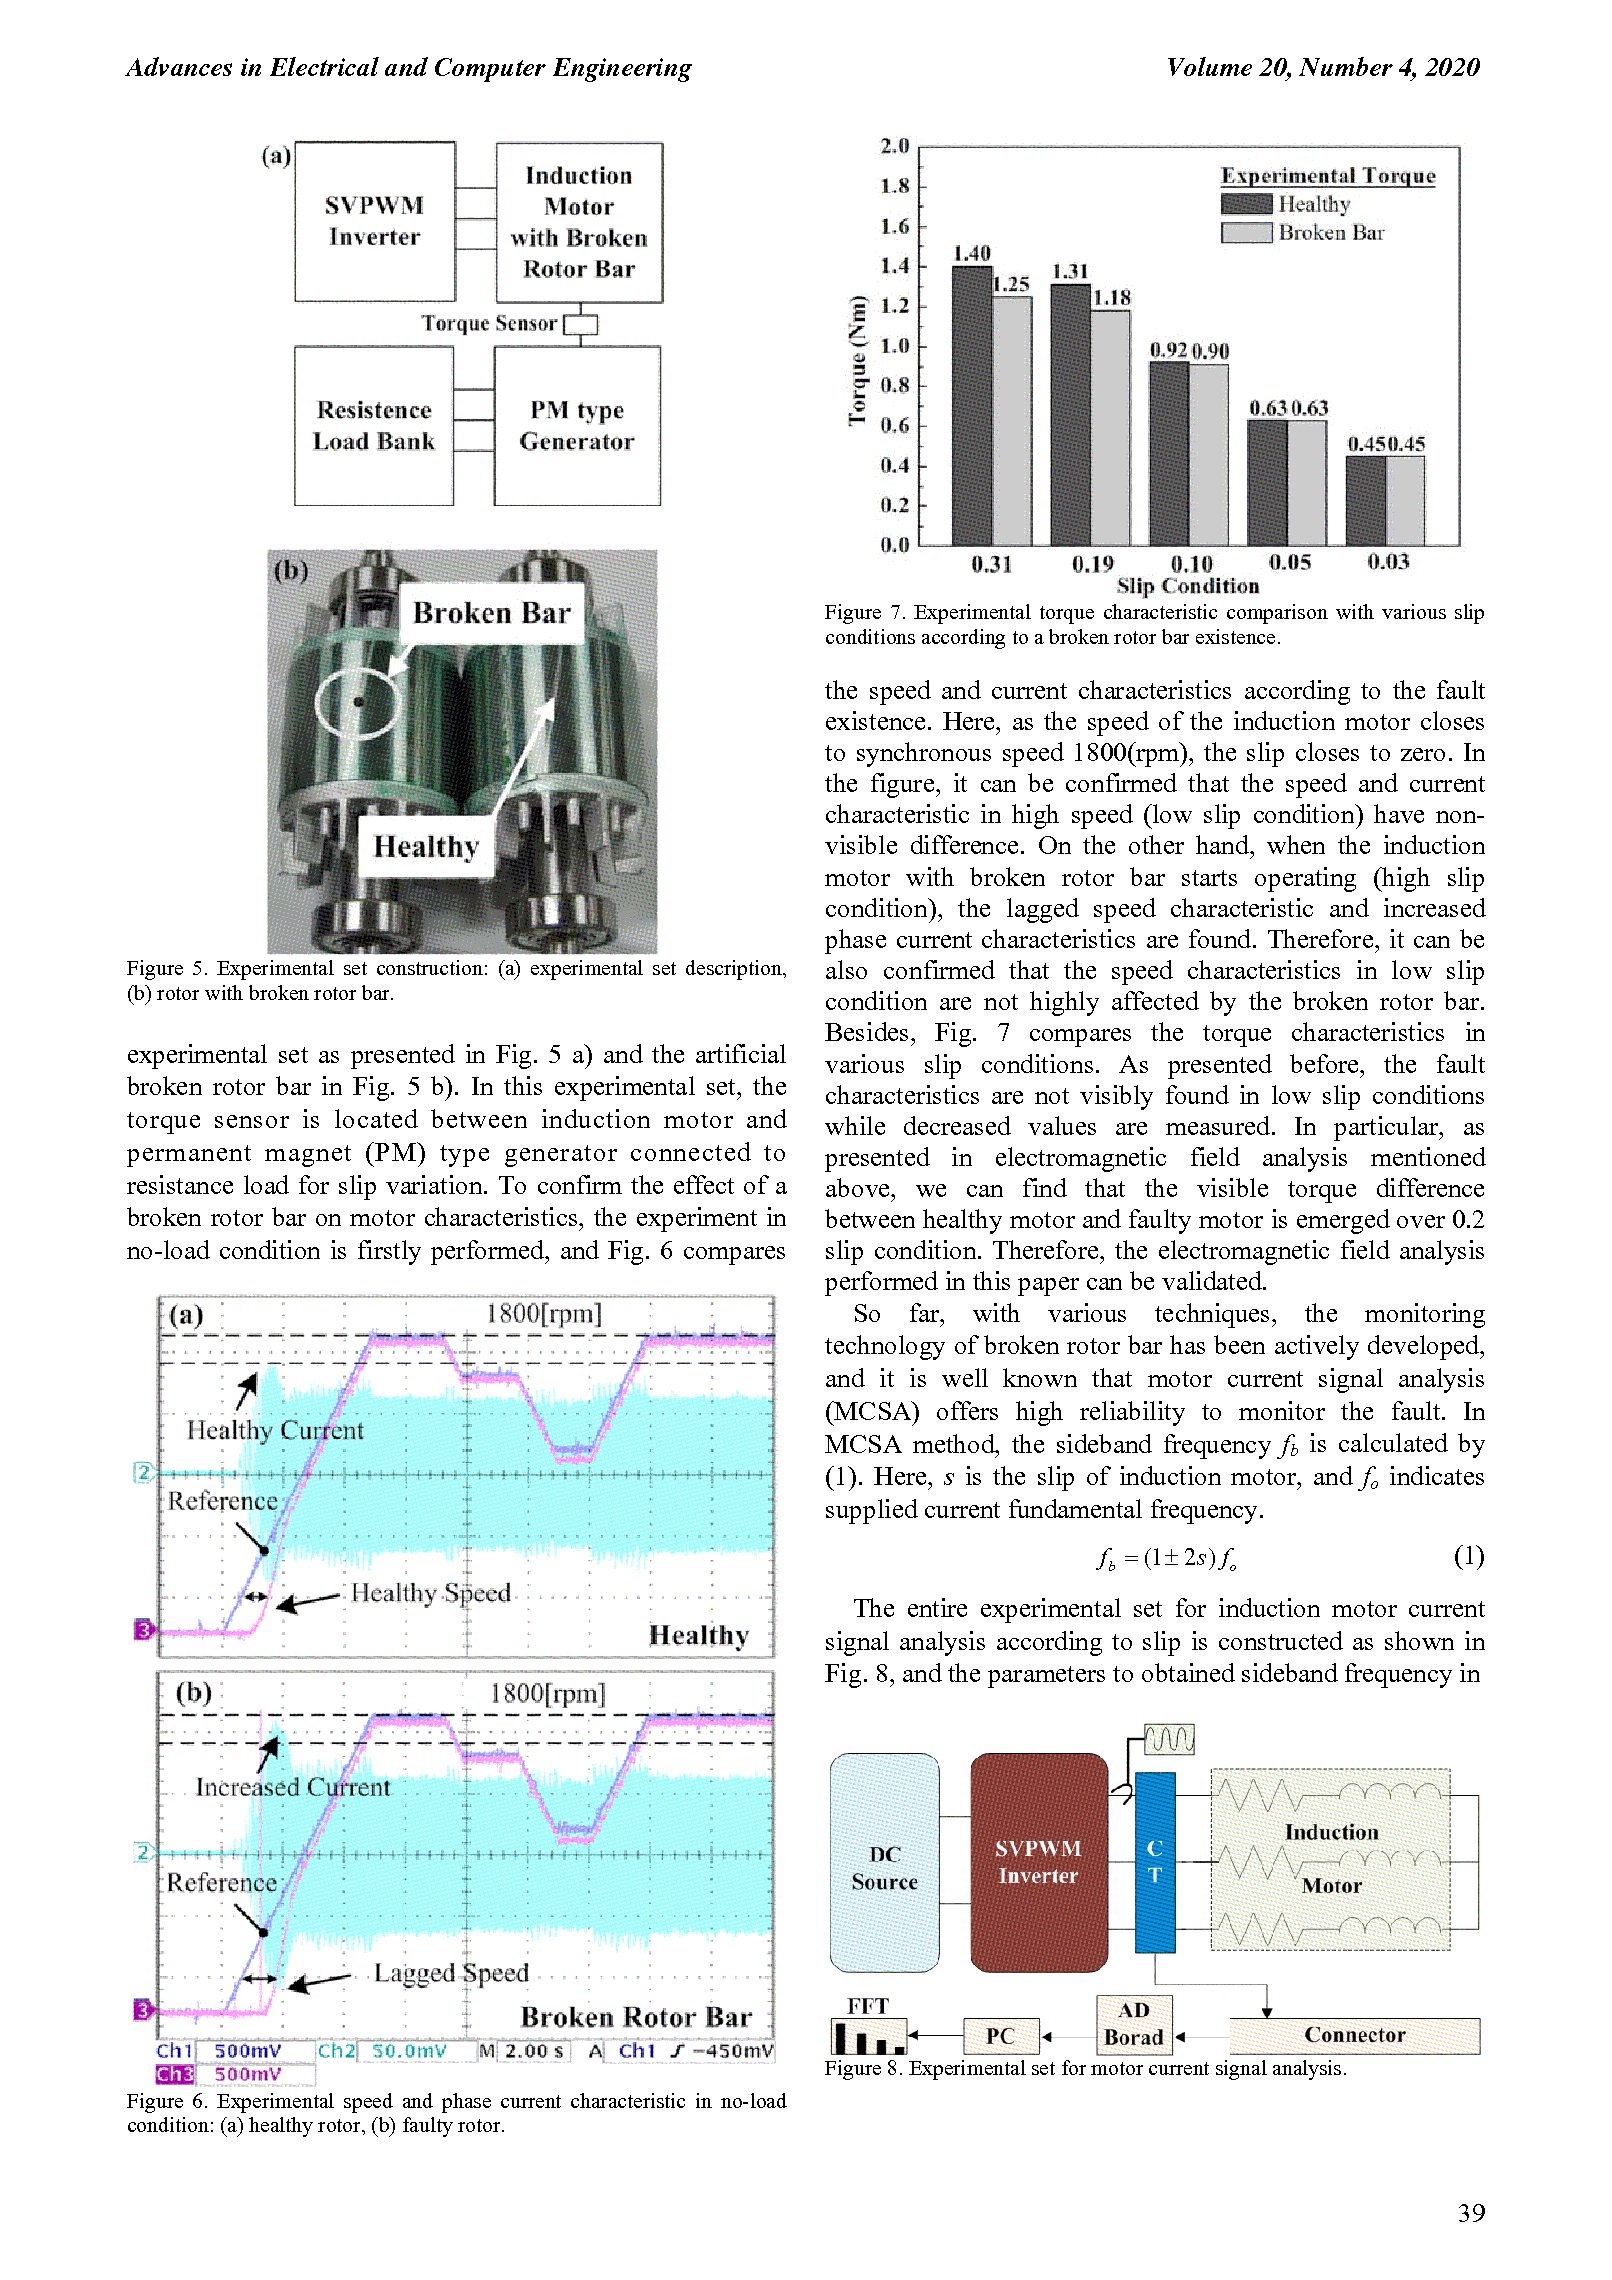 PDF Quickview for paper with DOI:10.4316/AECE.2020.04005